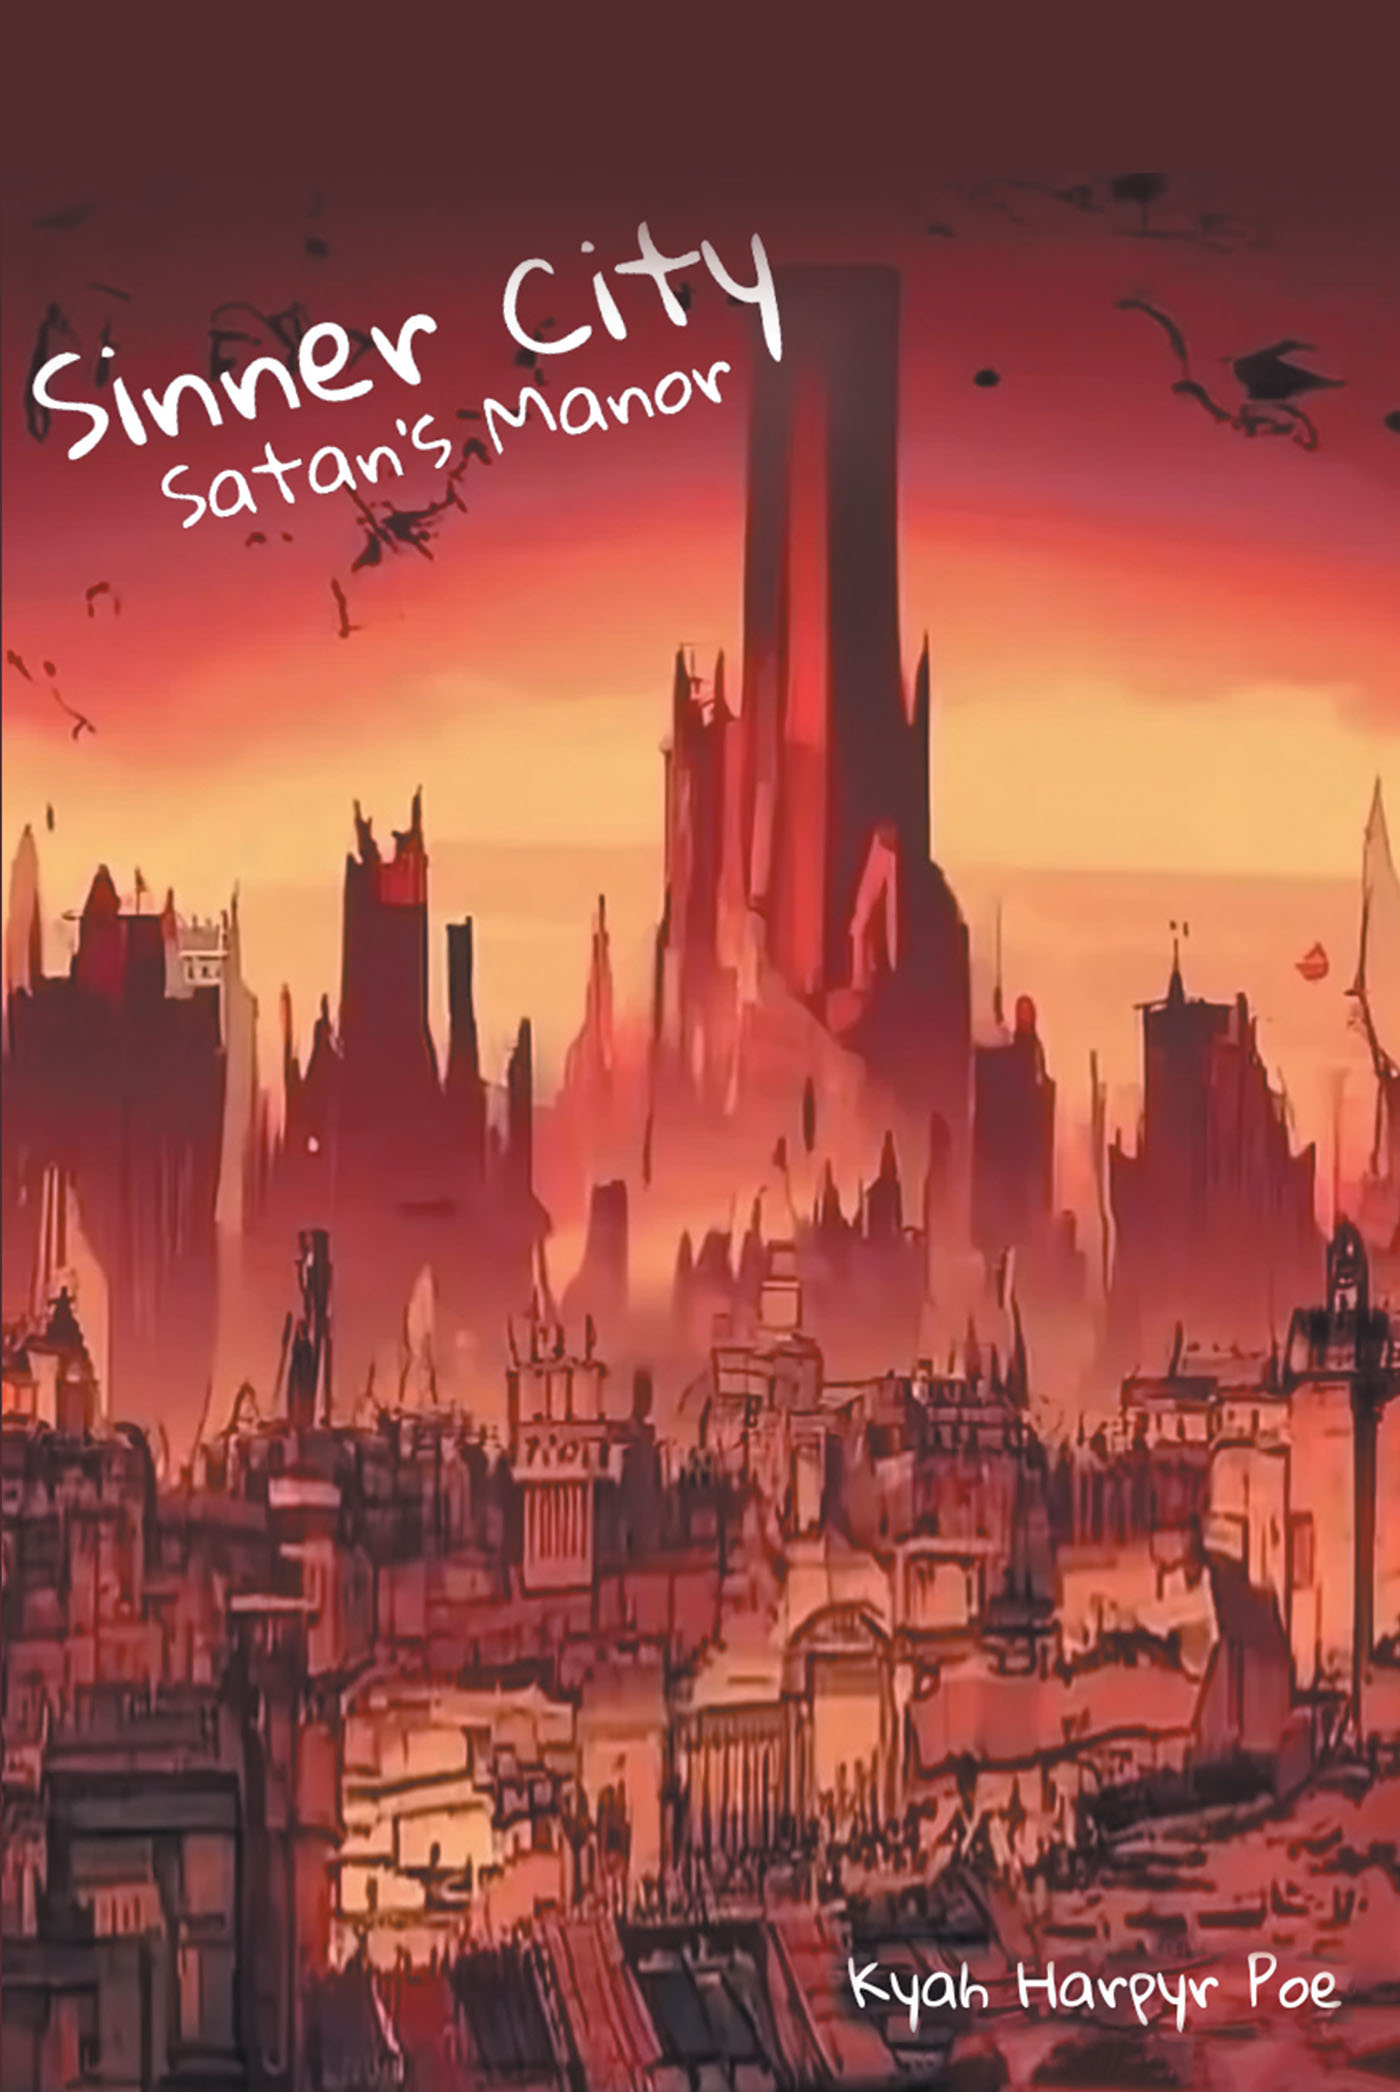 Kyah Harpyr Poe’s New Book, "Sinner City: Satan's Manor," is a Fascinating and Refreshing Novel All About What Would Happen if Hell Went Civilized